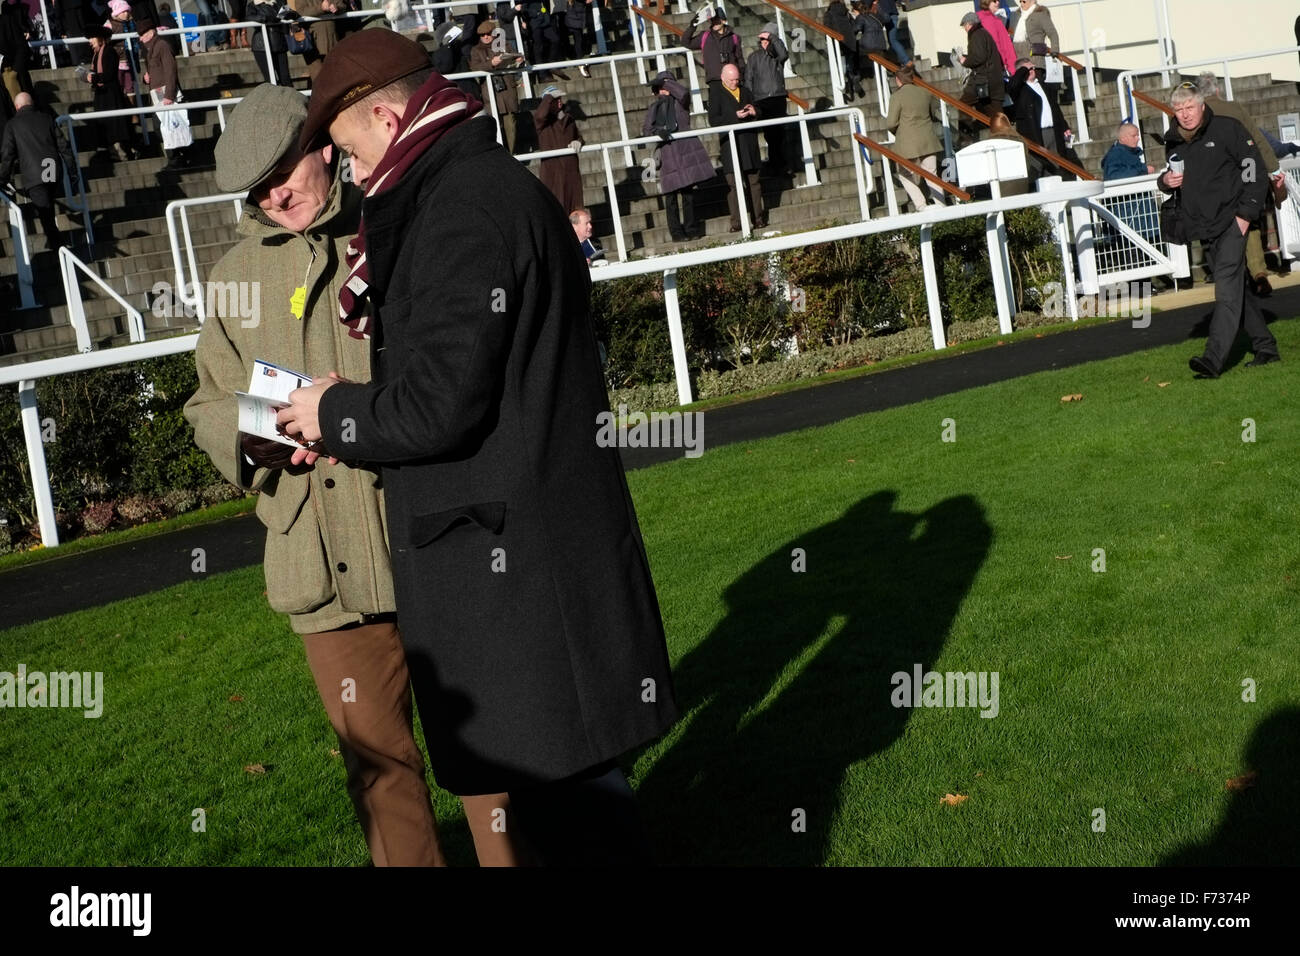 Ascot raceday, 21st November 2016. Racehorse owners in the parade ring before the race. Stock Photo